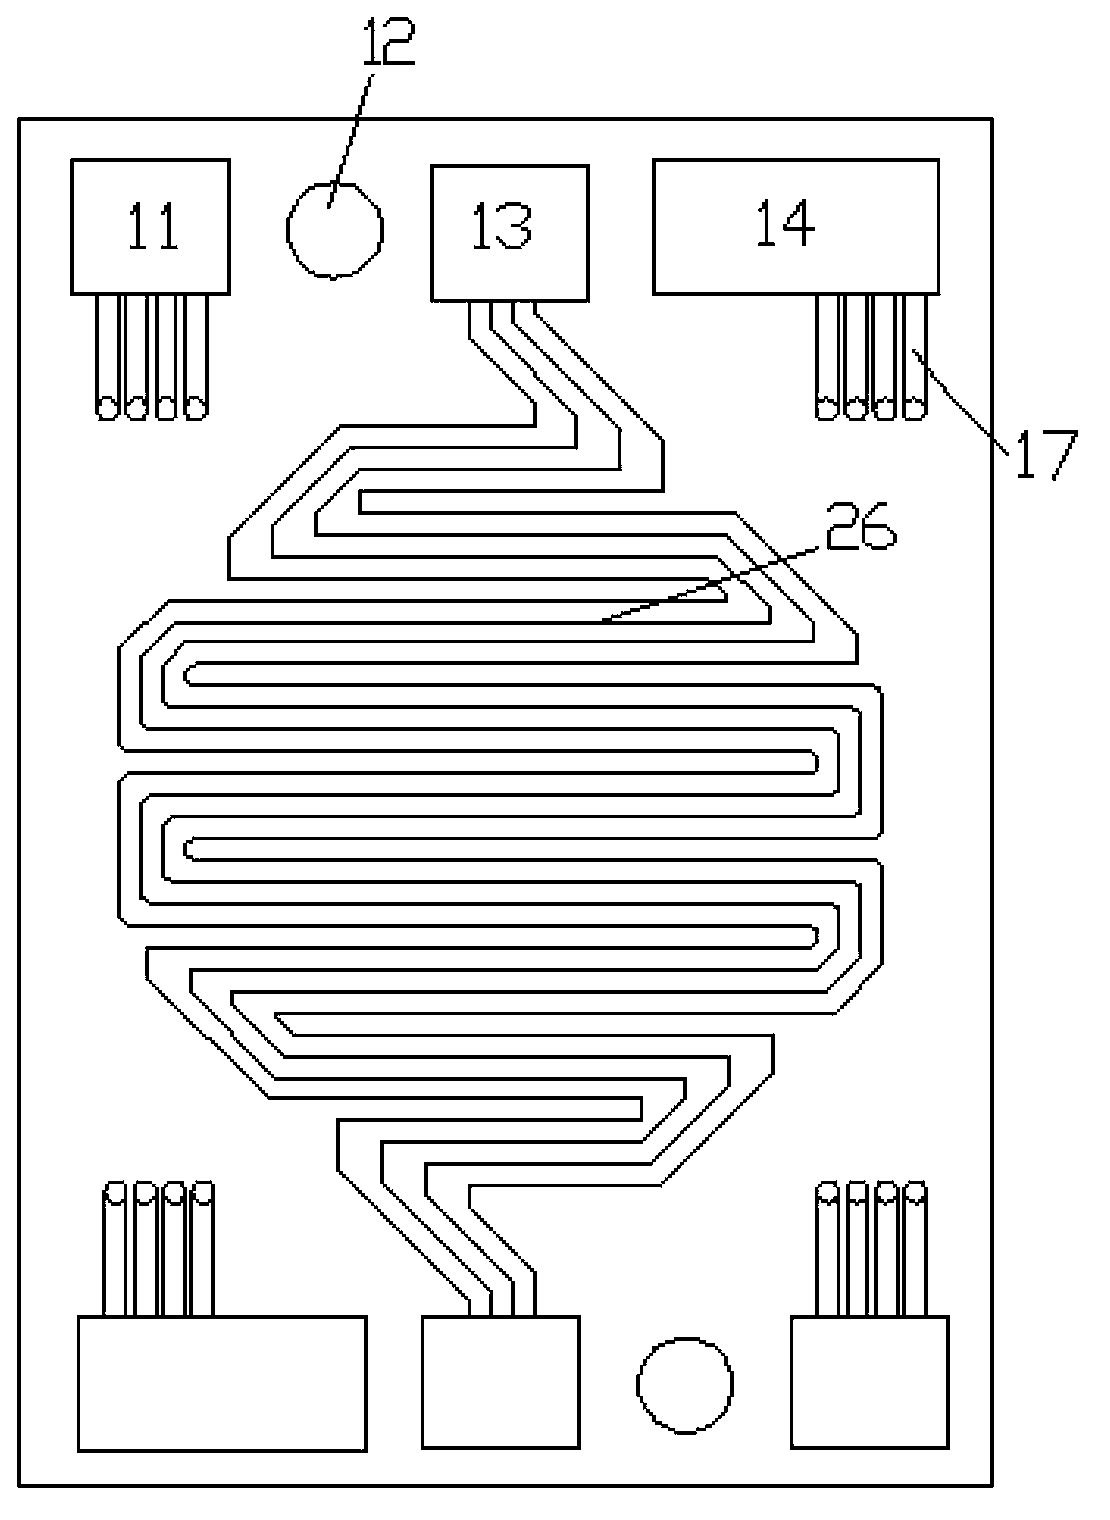 Fuel cell pile online regional detection system and method